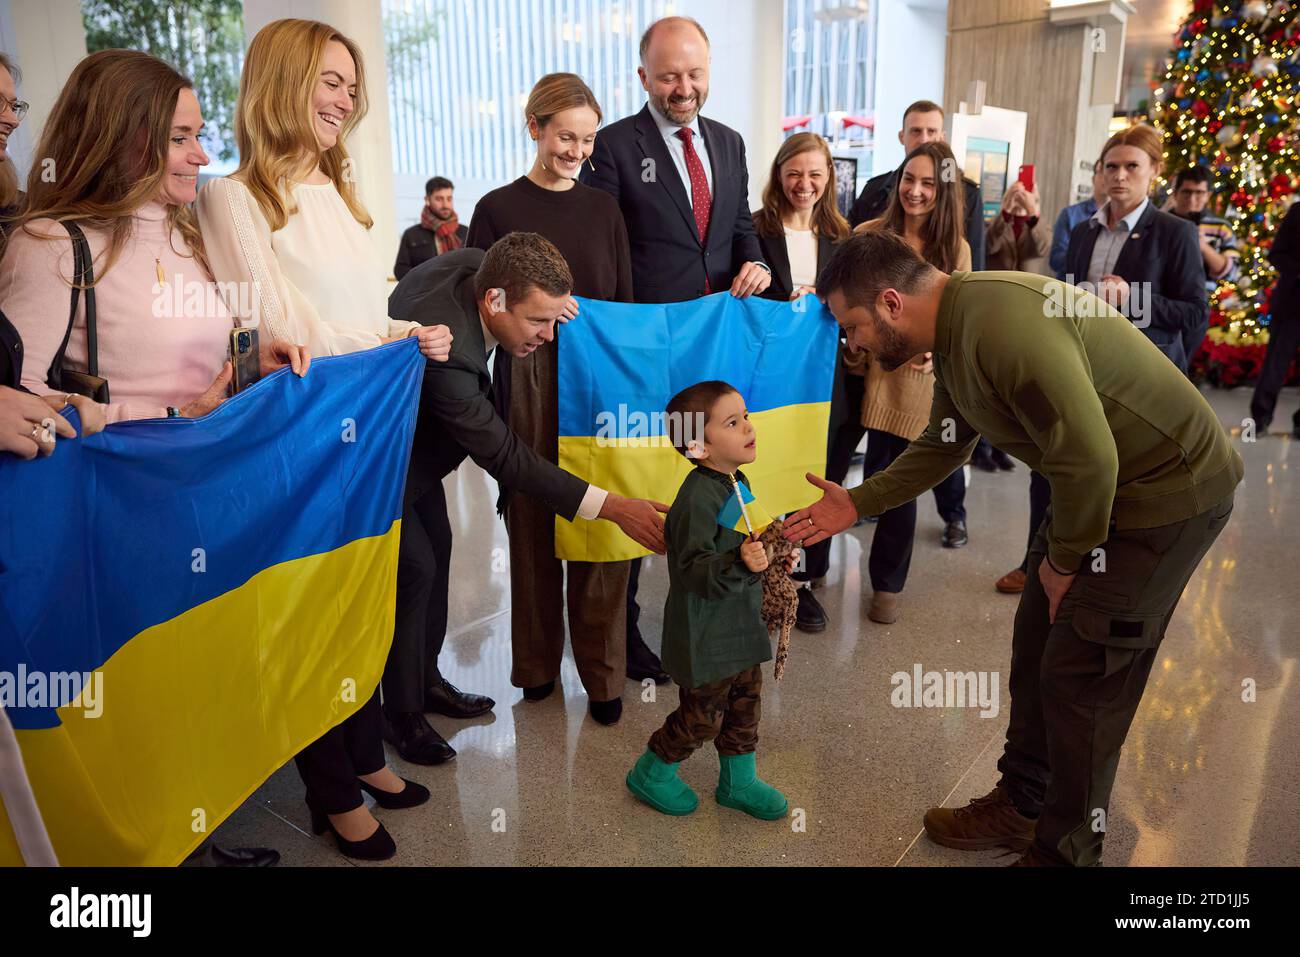 The President of Ukraine, Volodymyr Zelensky,  and his staff on a working visit to Washington DC. Zelensky visited Capitol Hill, the White House and the International Monetary Fund. (Photographs: The Ukraine Presidential Office) Stock Photo